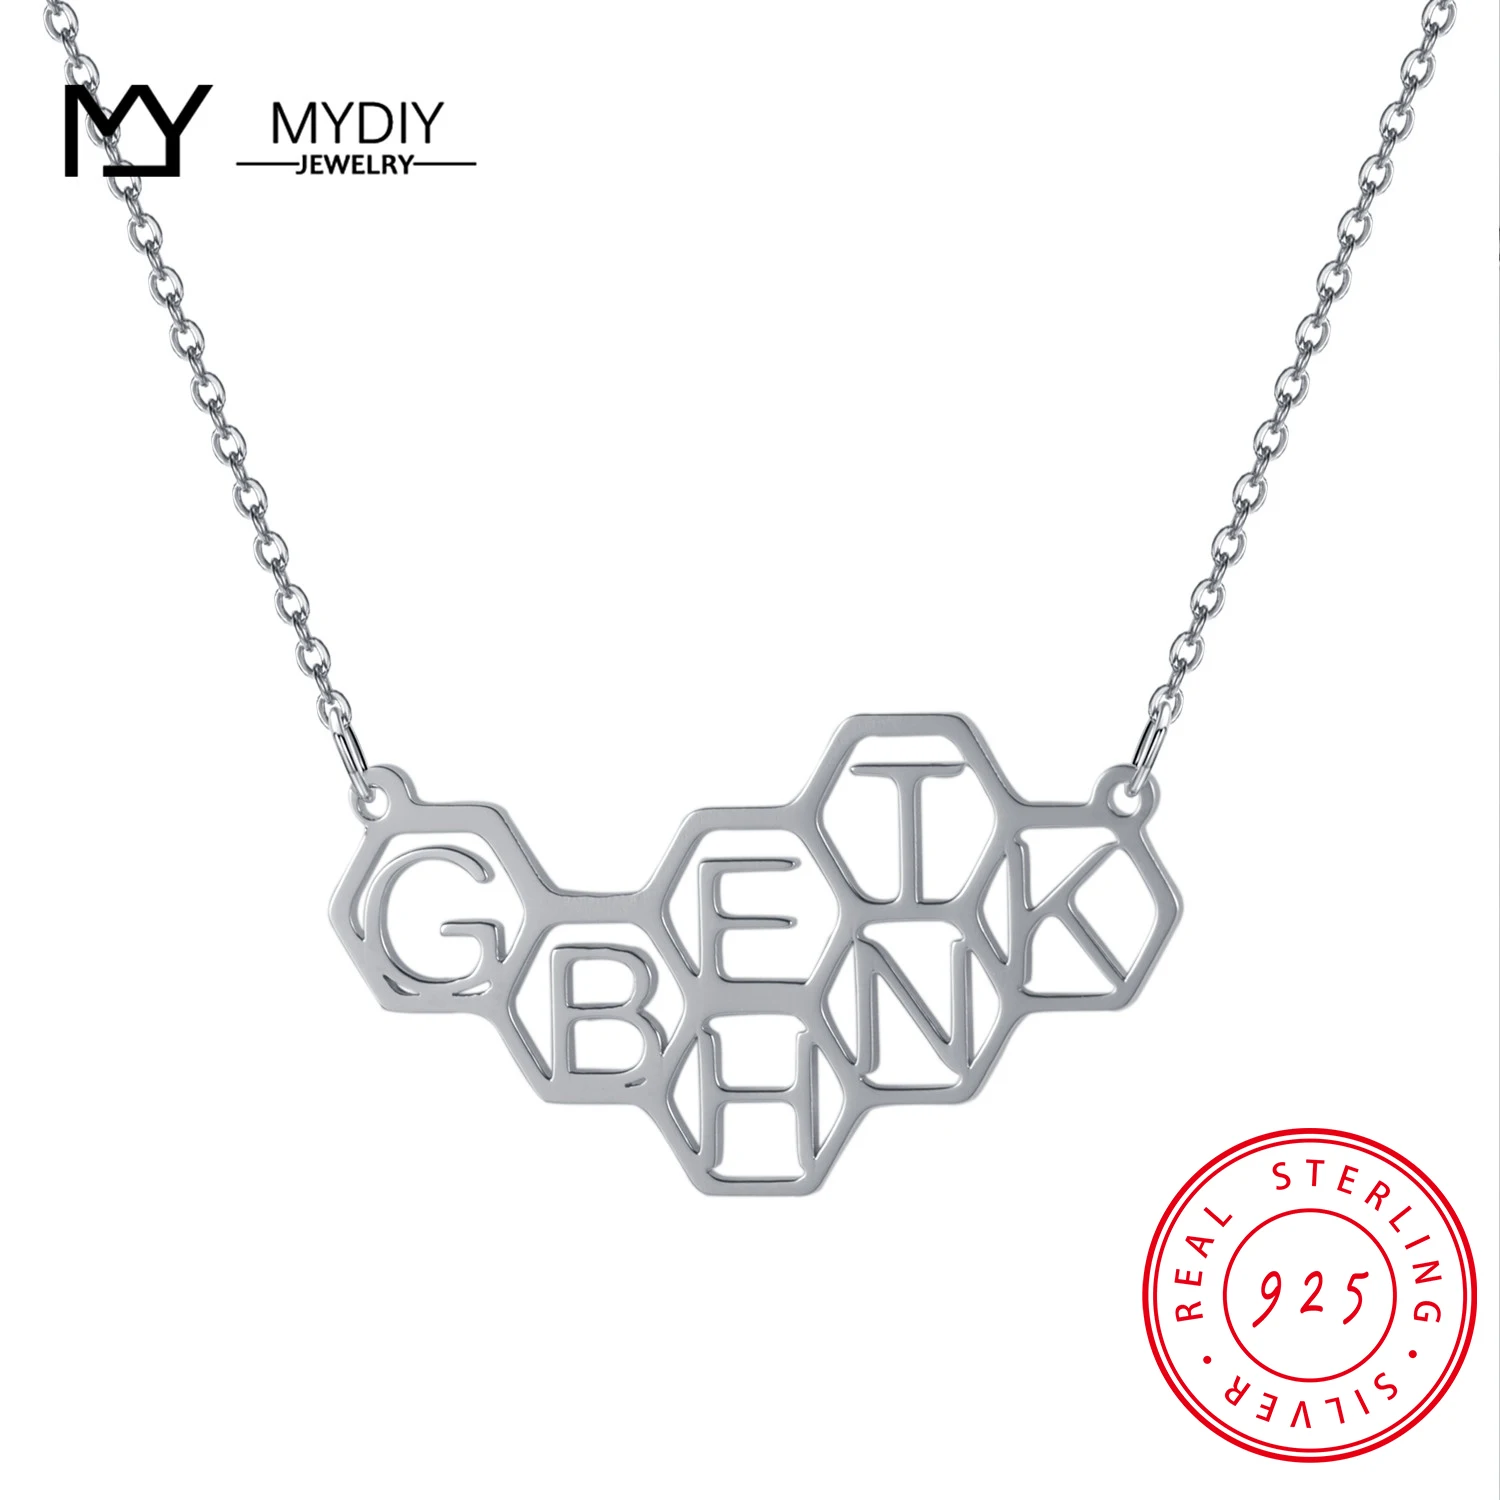 925 Sterling Silver Custom LOGO Name Necklace Fashion Chain Necklace Jewelry Custom Name For Best Friend MYDIY 2021 Trend custom key chain keychain gift for women friend stainless steele original keychains new fashion keyring men gift fashion jewelry